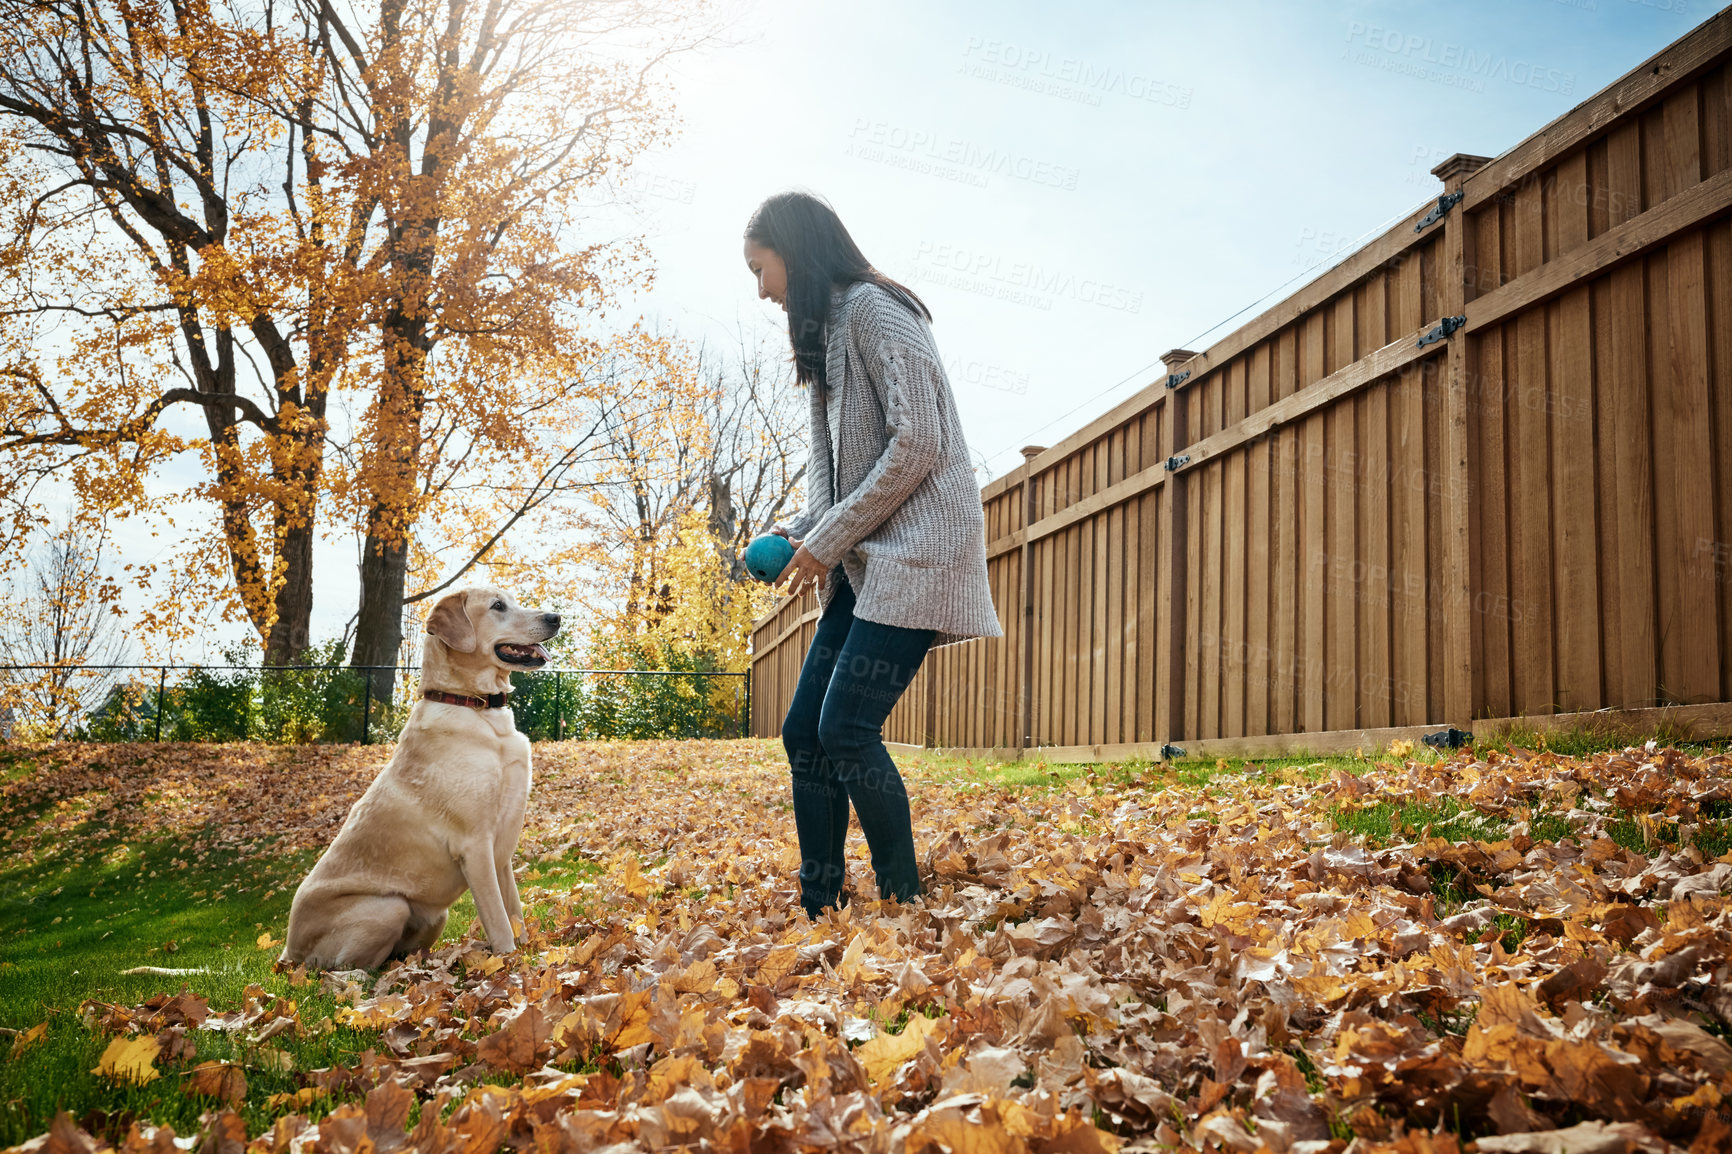 Buy stock photo Shot of an attractive young woman playing fetch with her dog on an autumn day in a garden